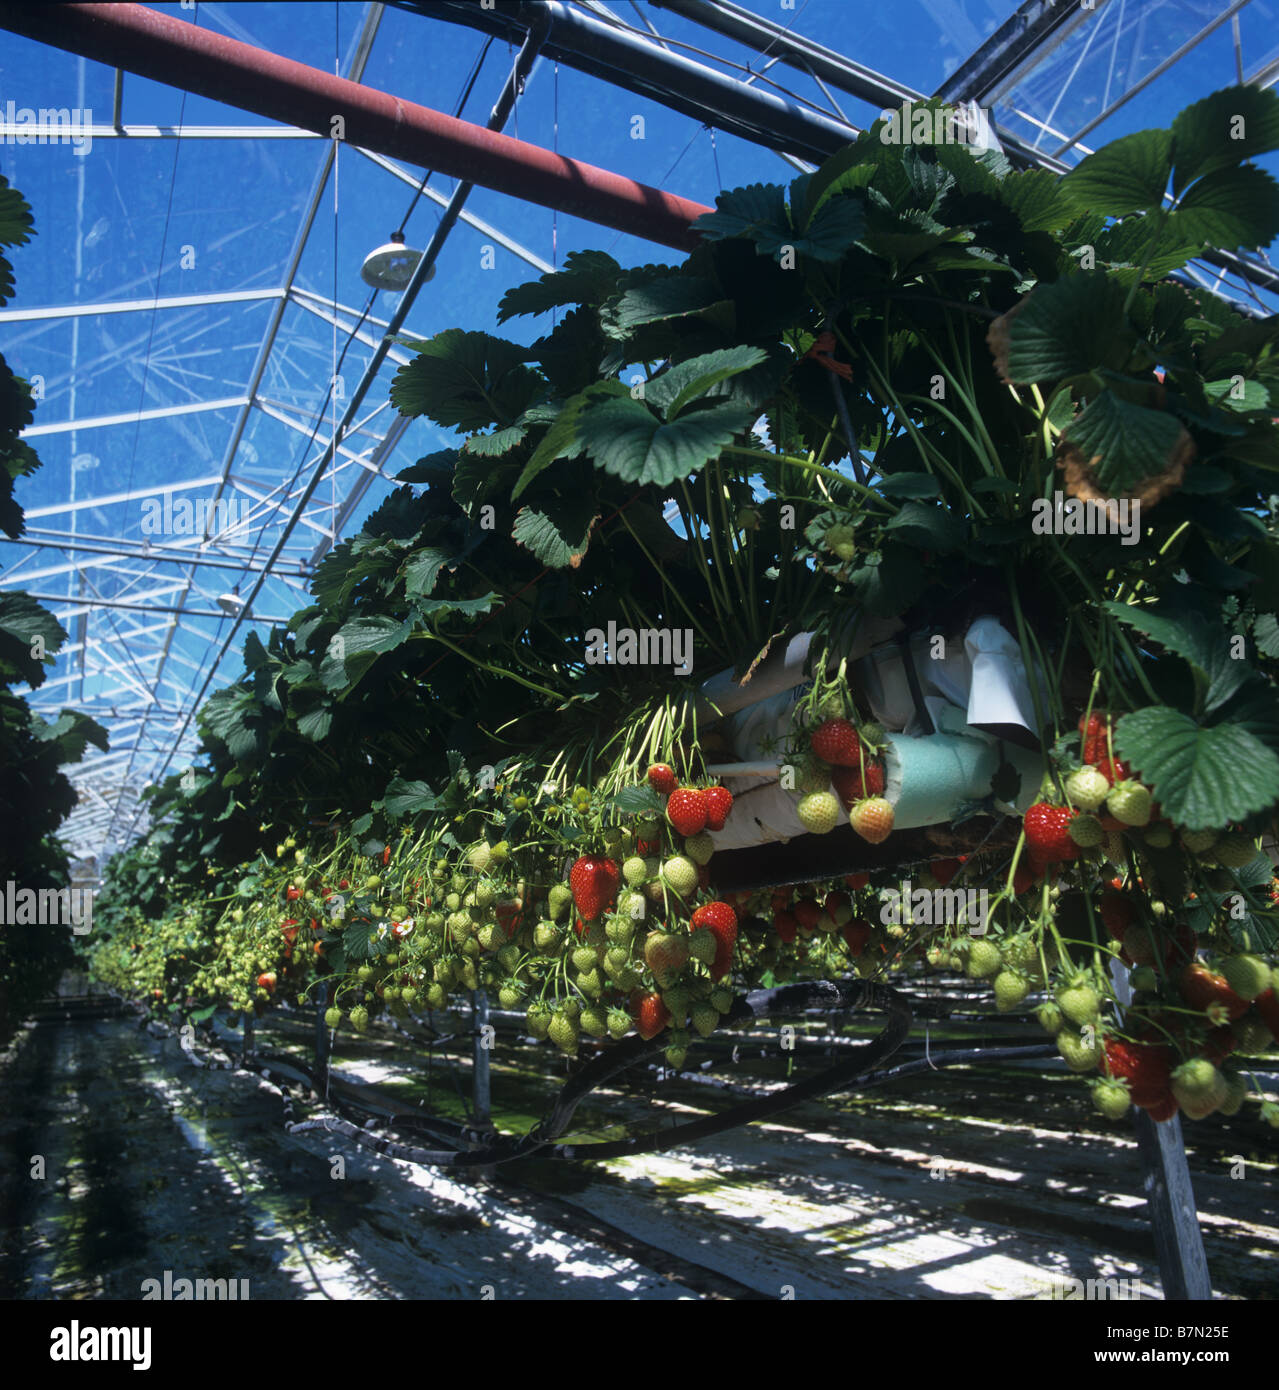 Strawberries variety Elsanta in suspended trays under glass with nutrient watering system Stock Photo